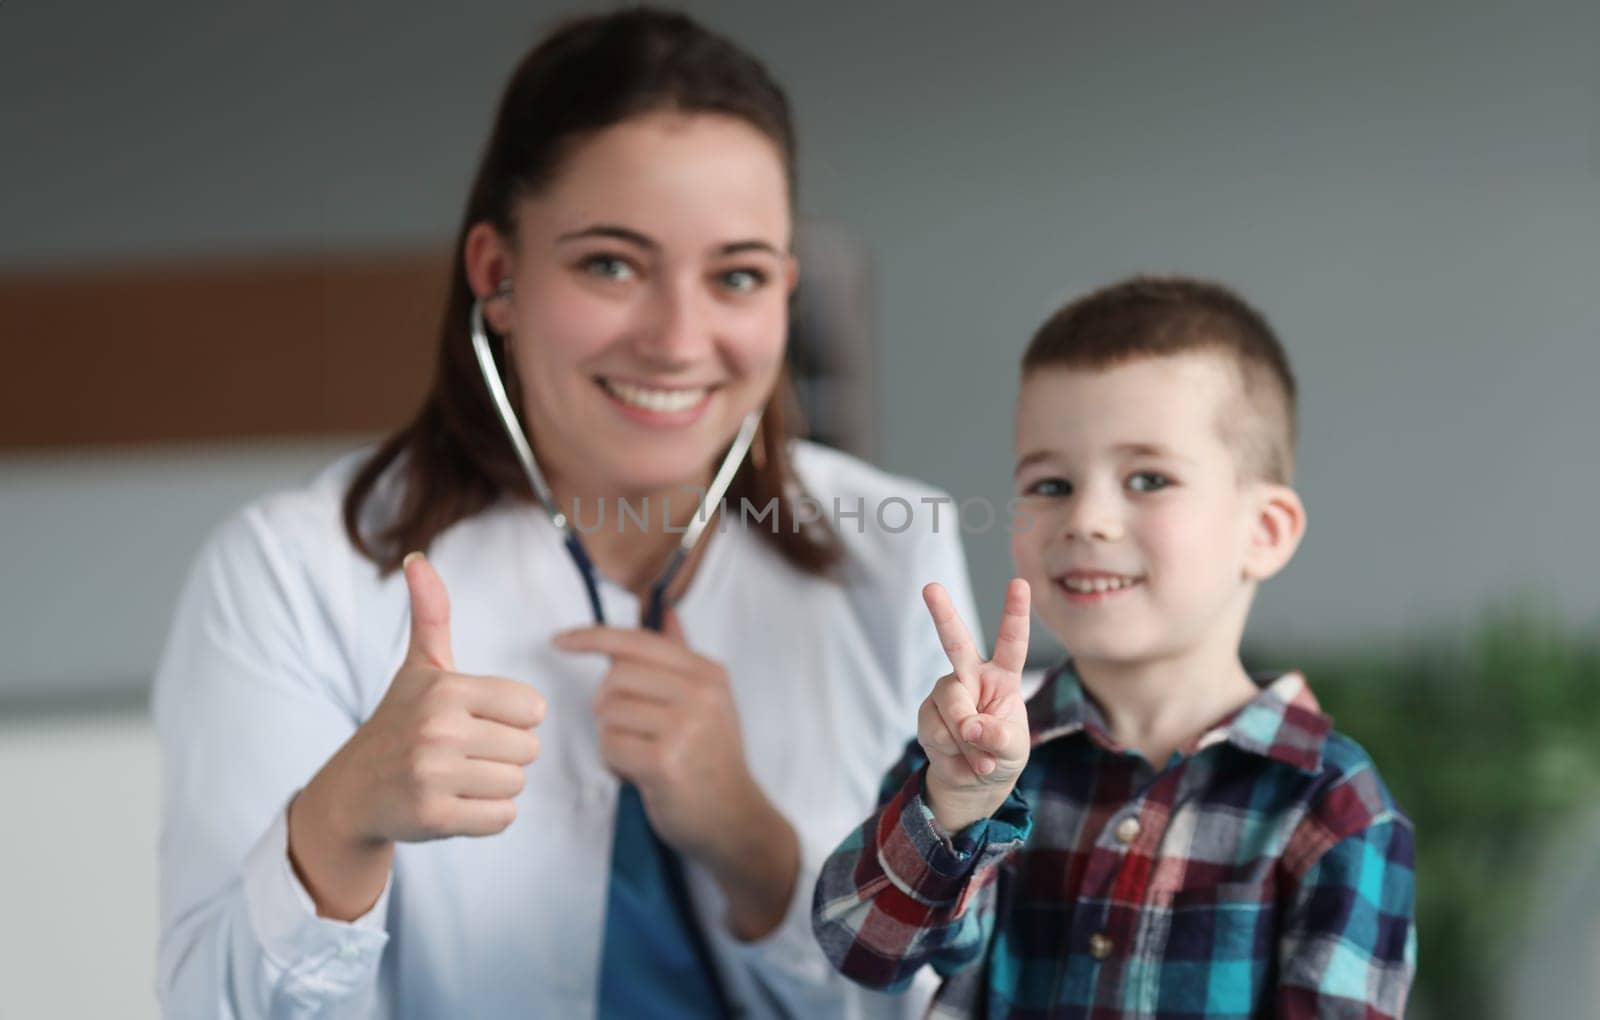 Young smiling doctor and child showing thumbs up closeup. Pediatrics examination and treatment of children concept